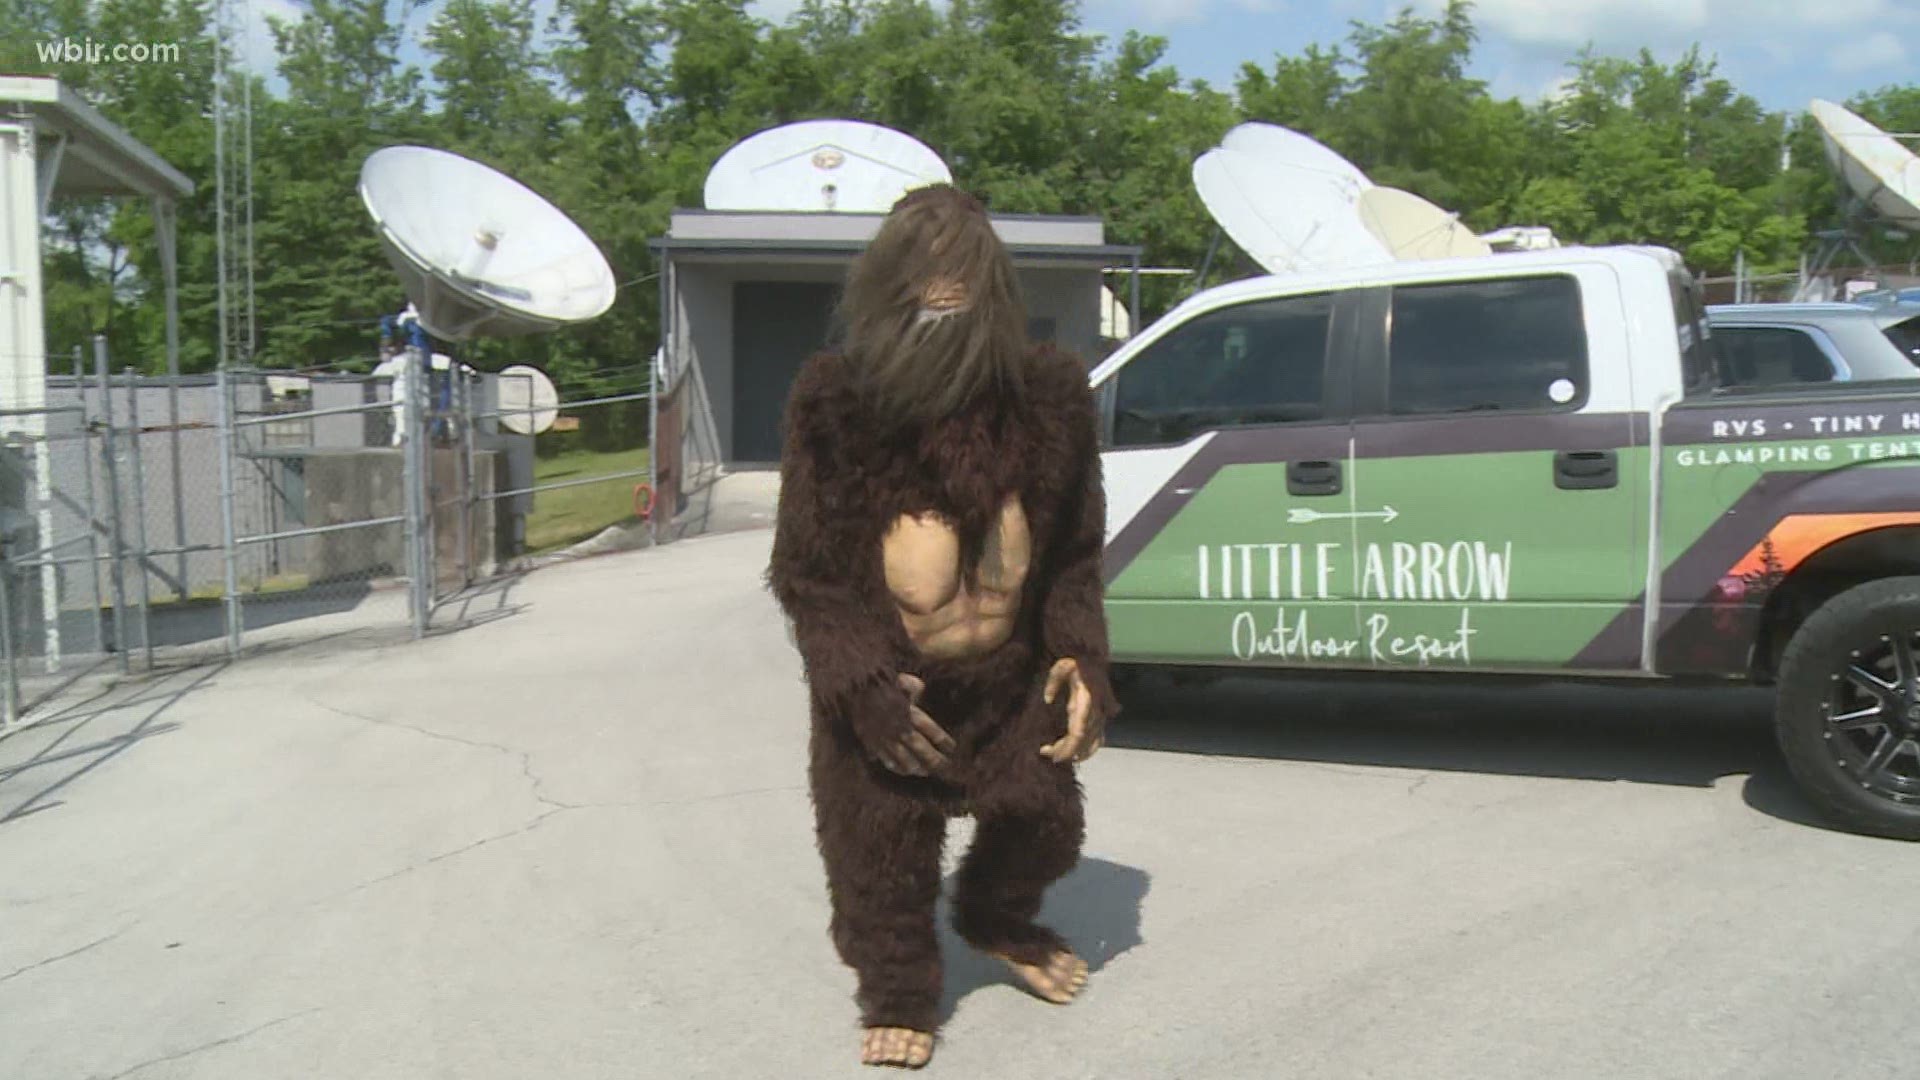 Smoky Mountain Bigfoot Festival set for May 22 in Townsend